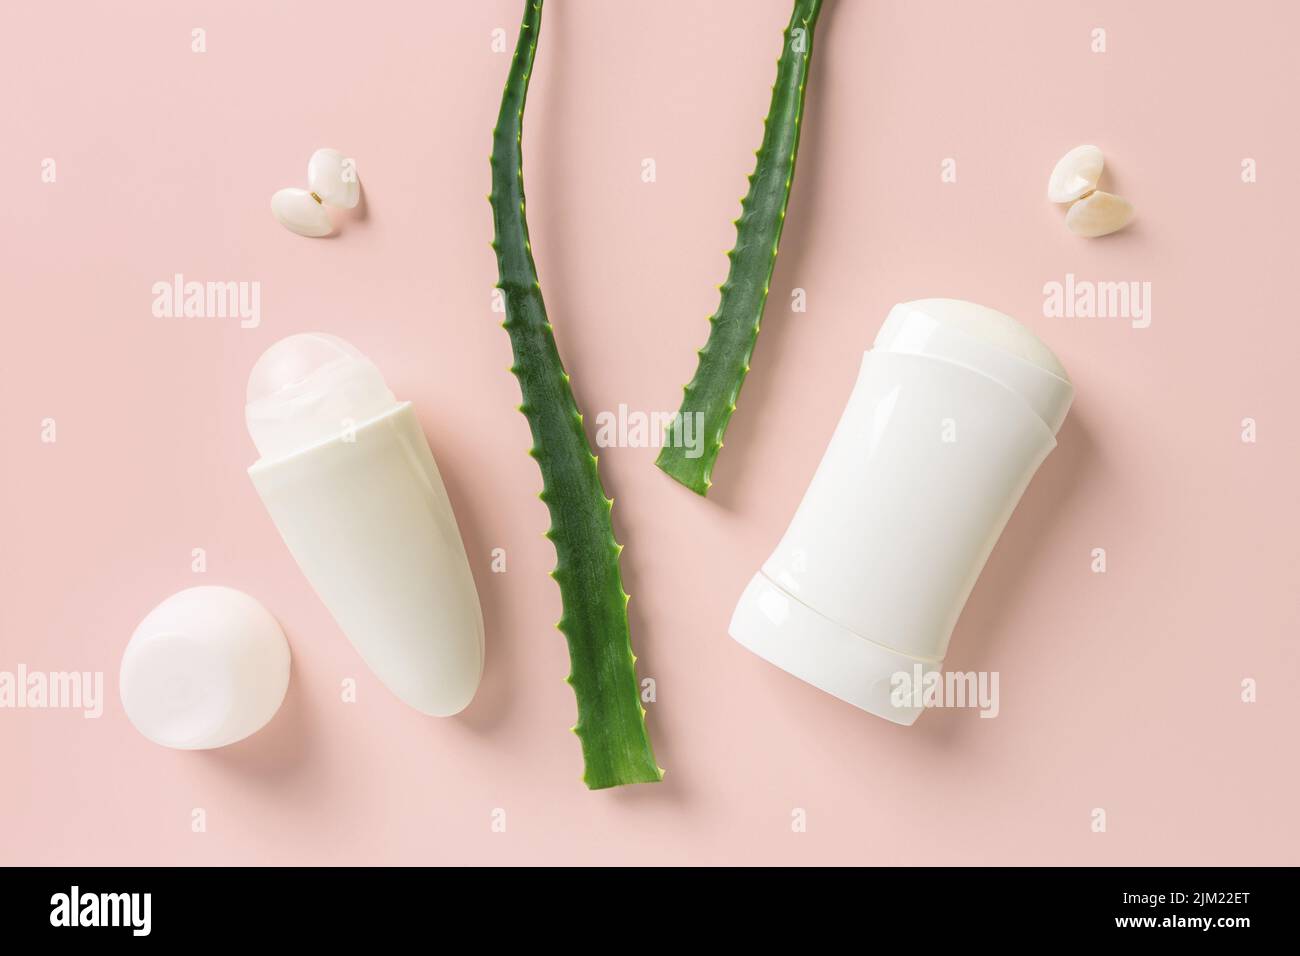 Two fresh green aloe leaves between roll on deodorant and solid antiperspirant on a pastel coral background. Concept of organic herbal  cosmetics. Stock Photo